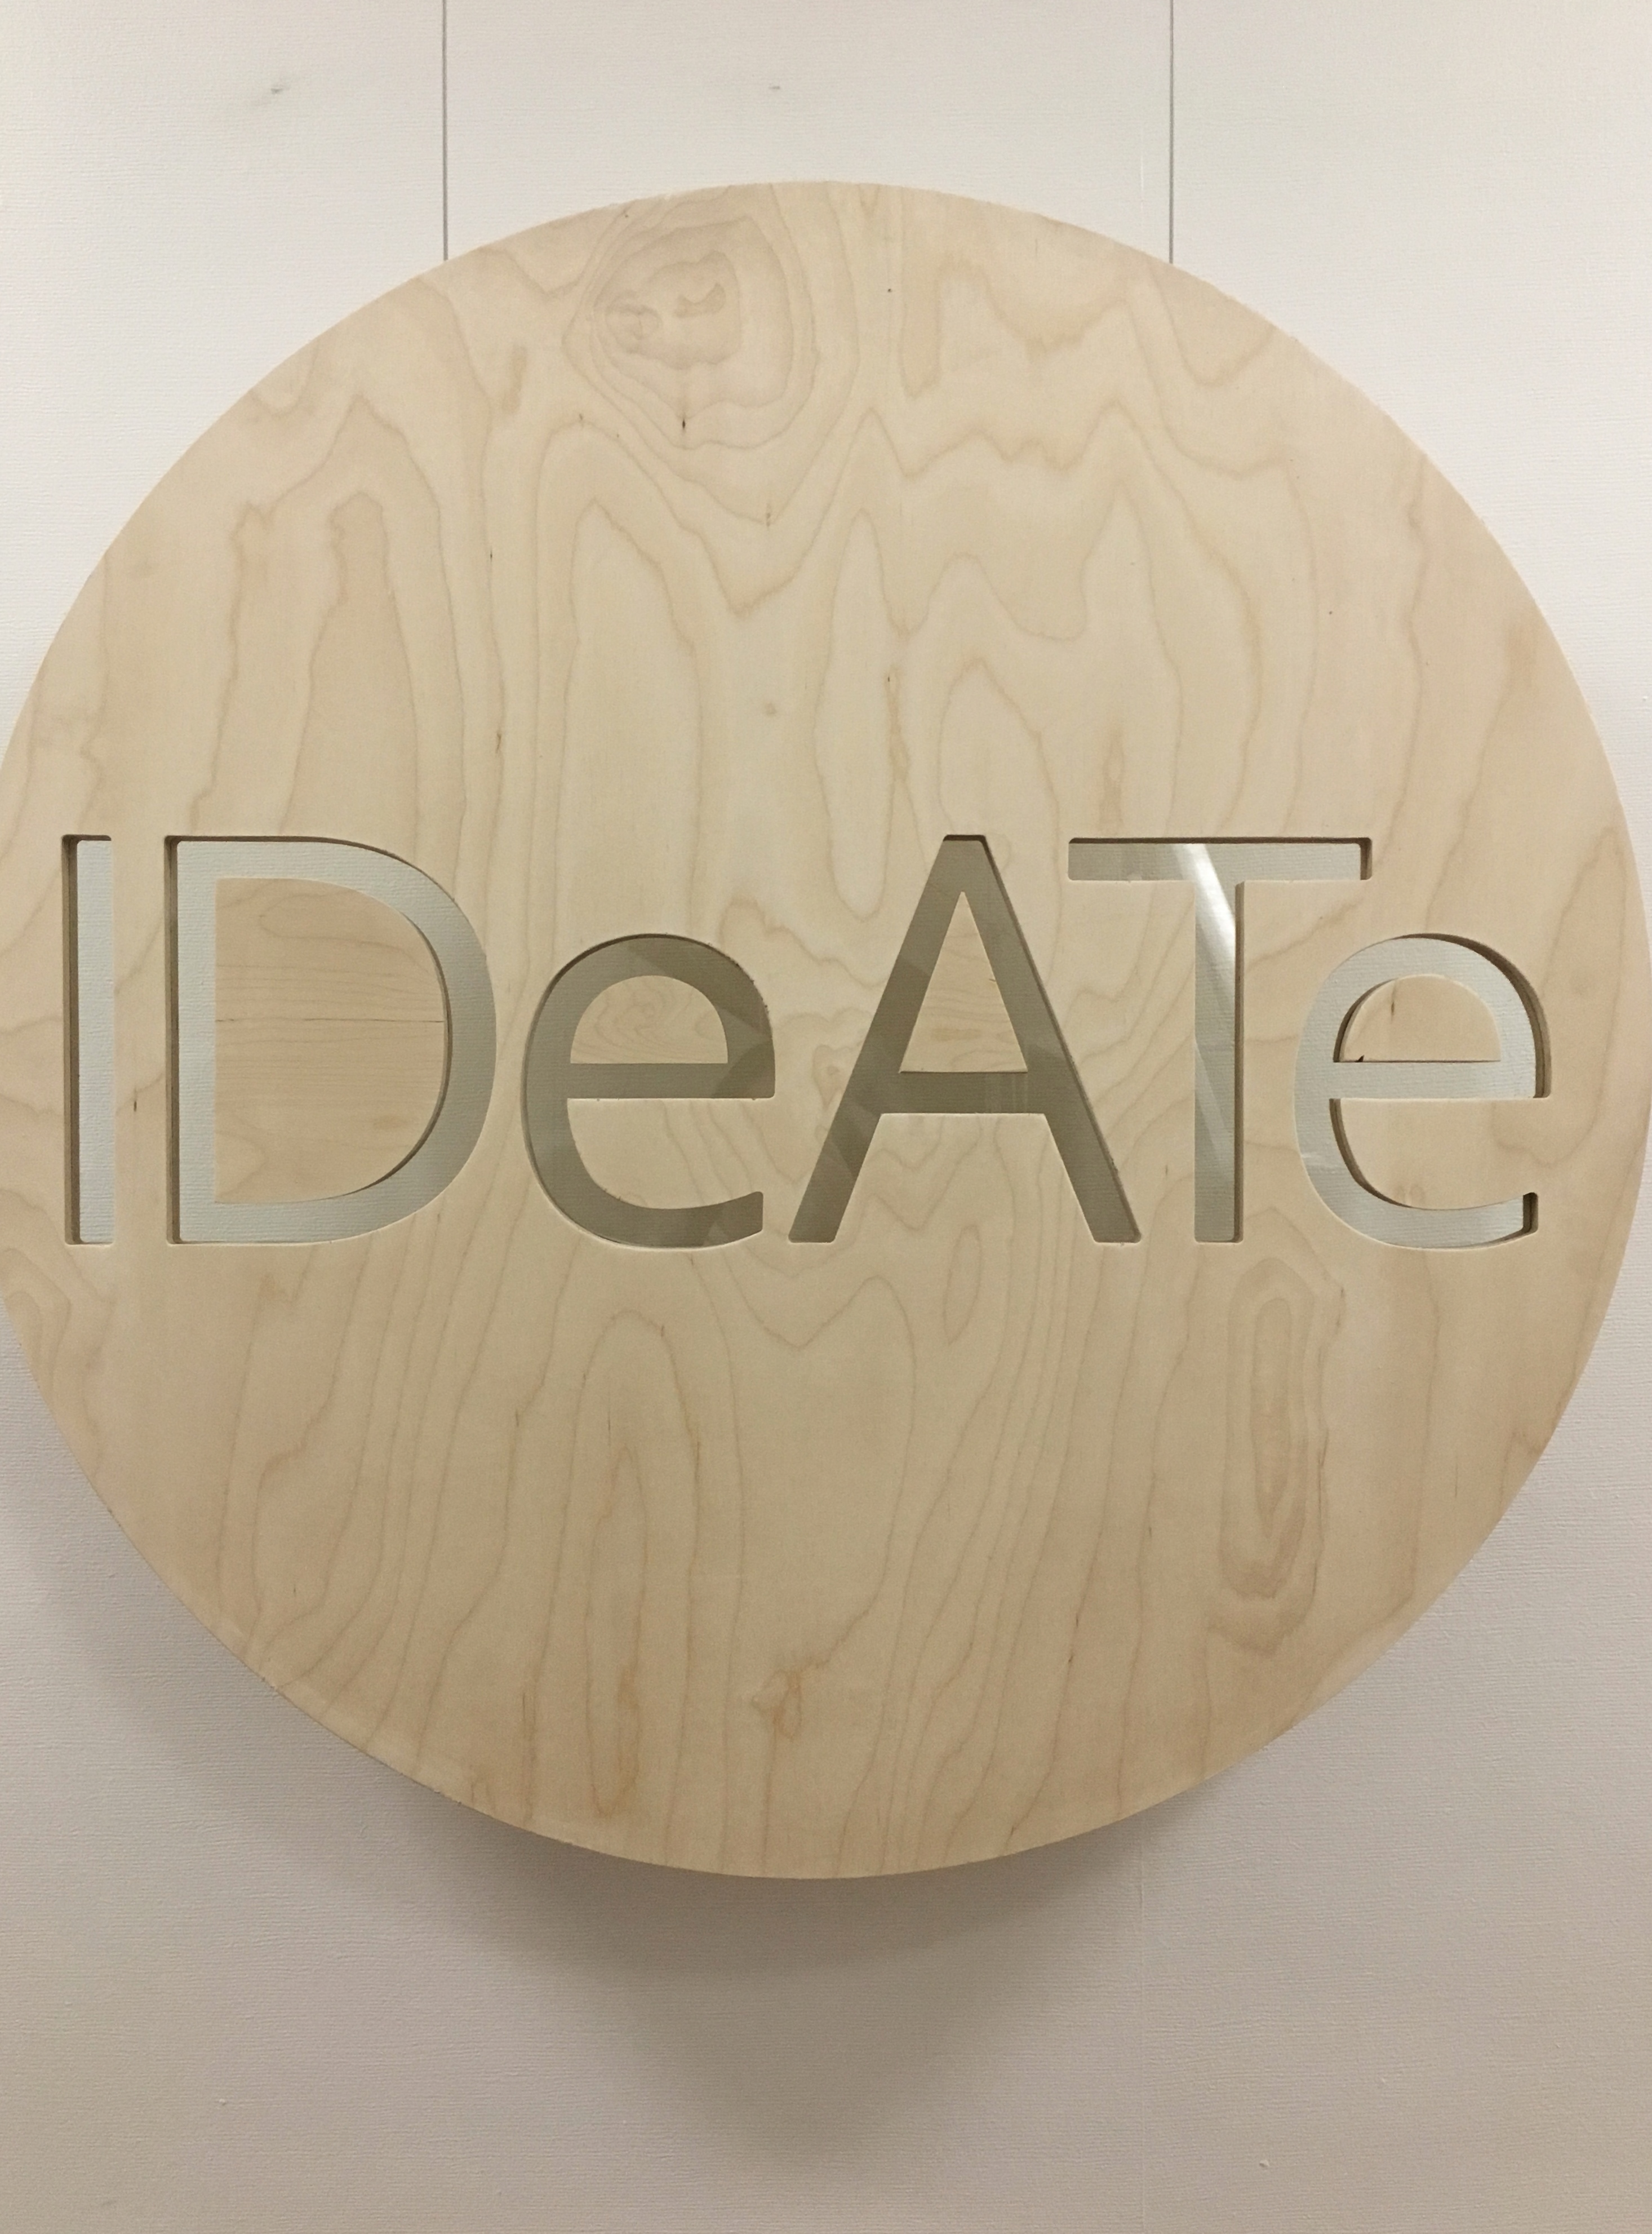 The IDeATe sign in the Hunt Library basement